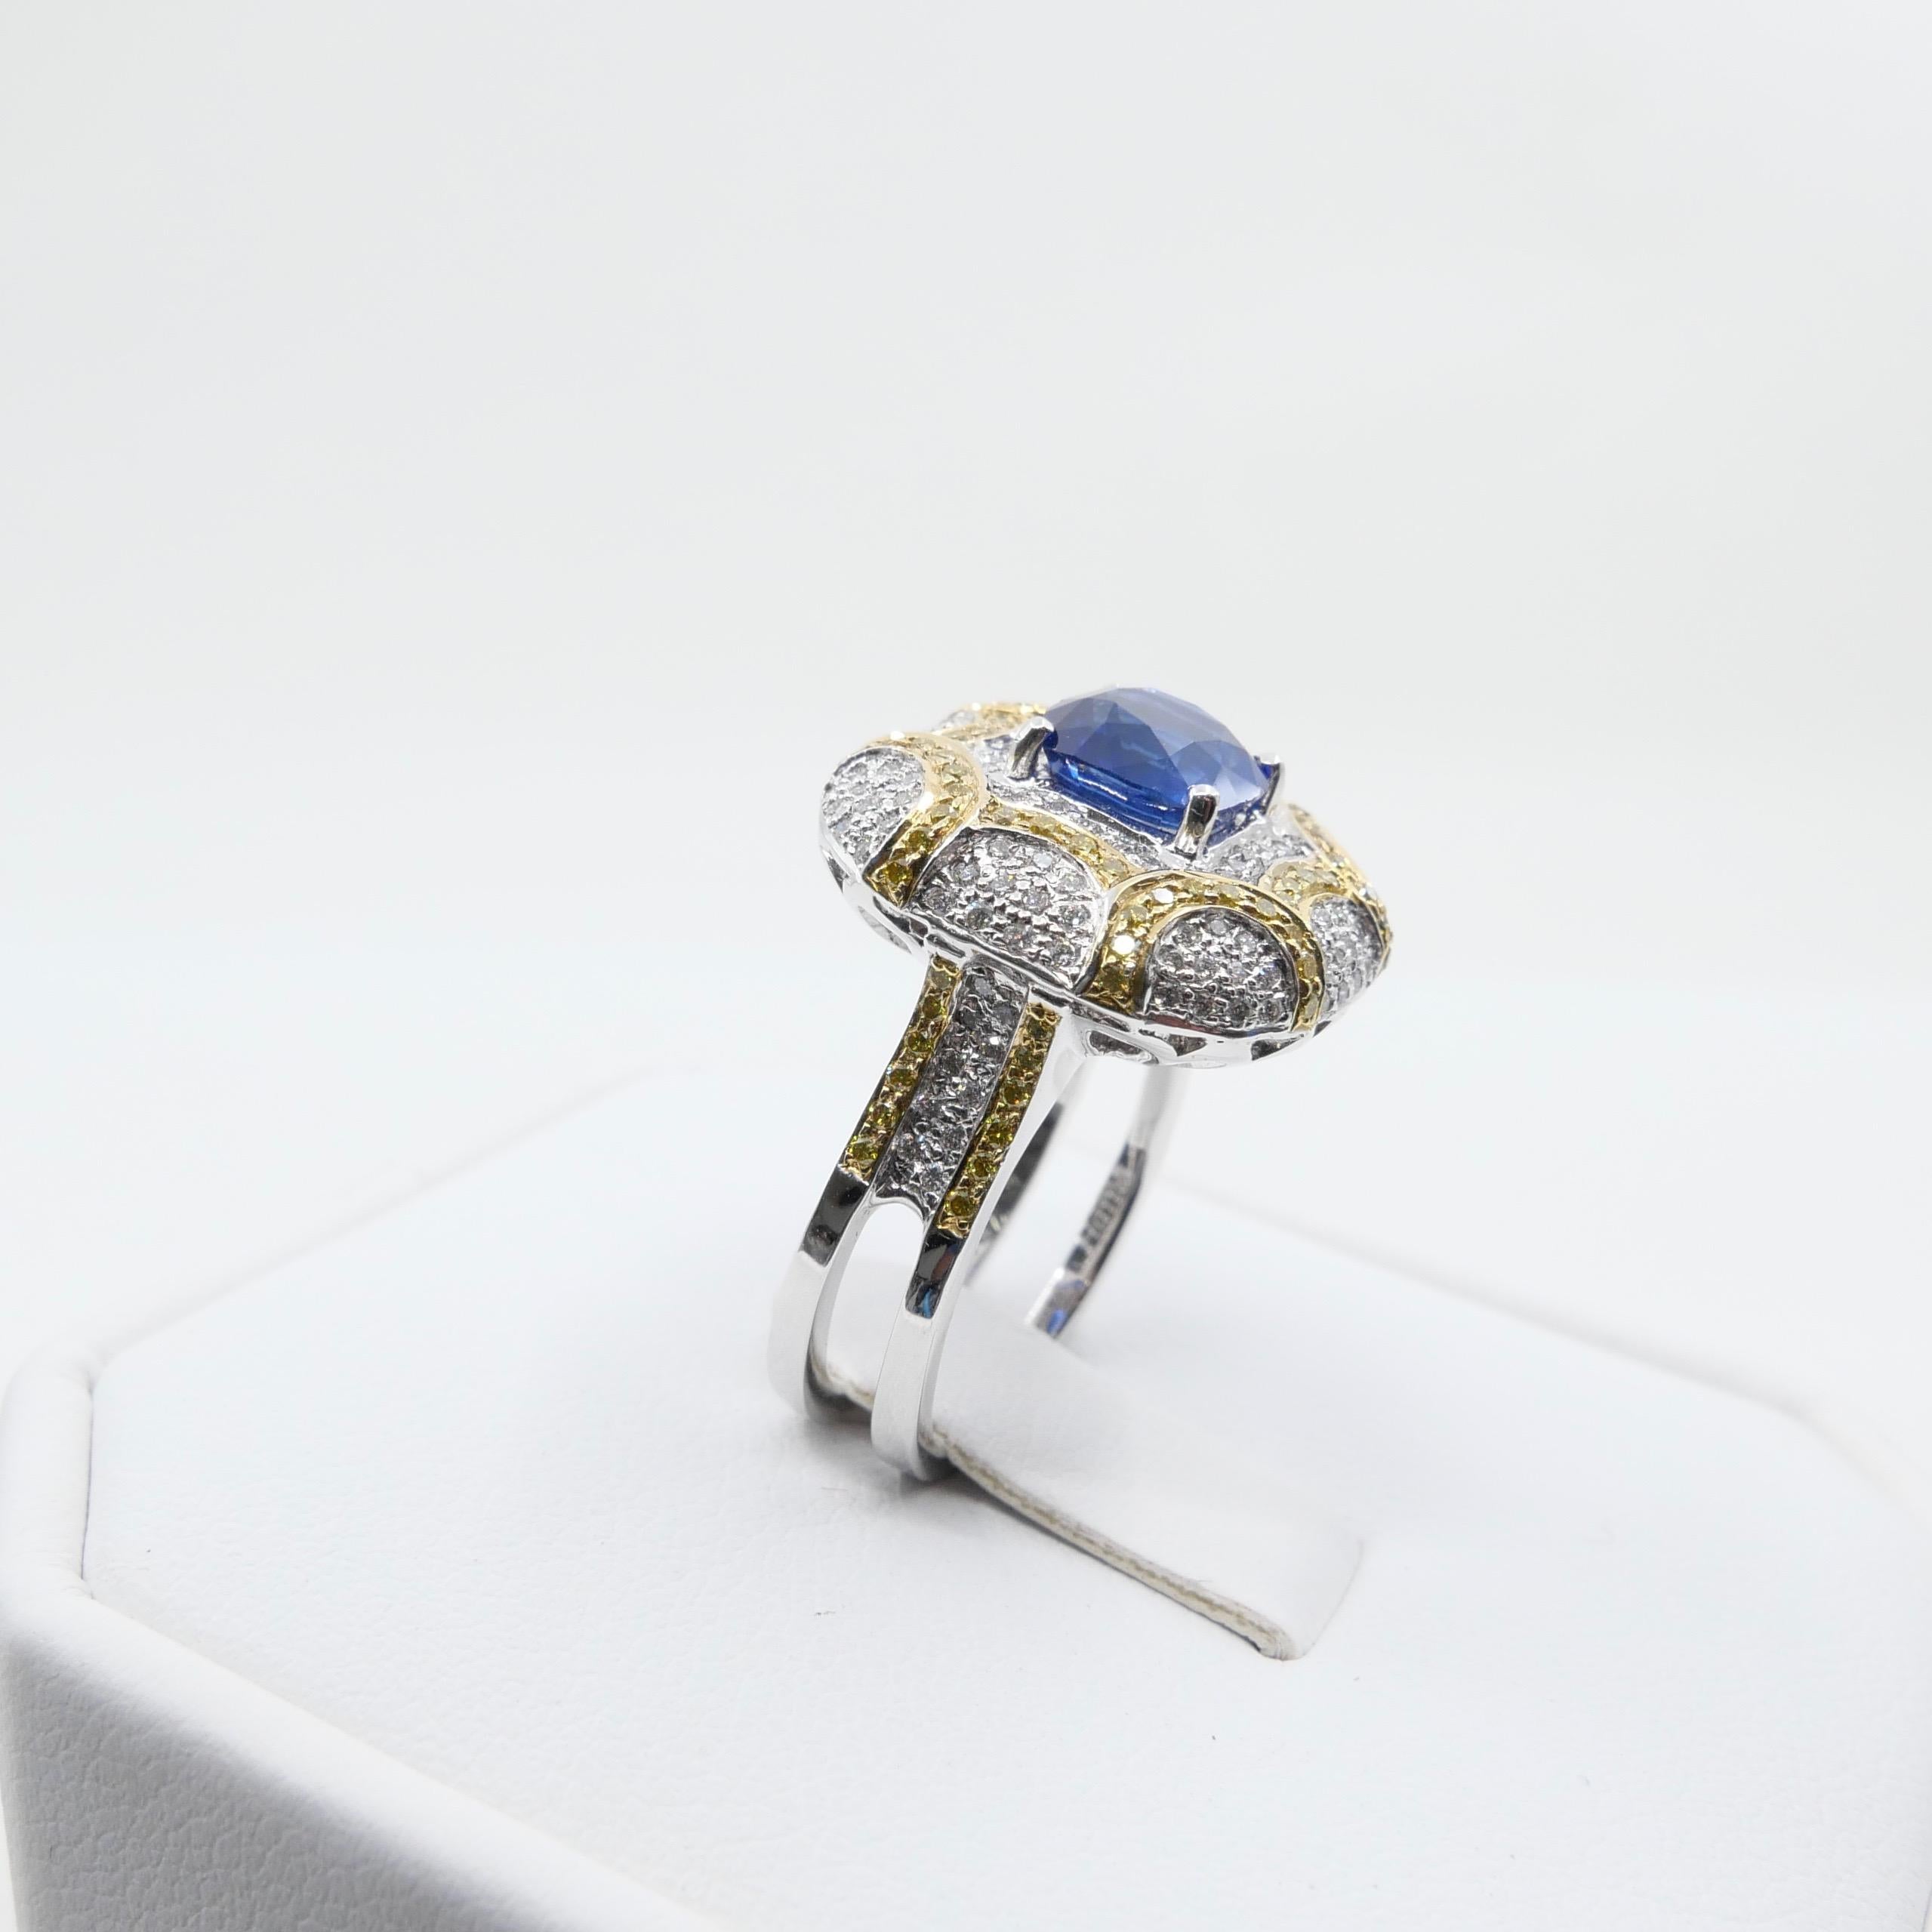 ICA Certified 1.74Cts Ceylon Heat Sapphire Ring, White and Fancy Yellow Diamonds For Sale 1